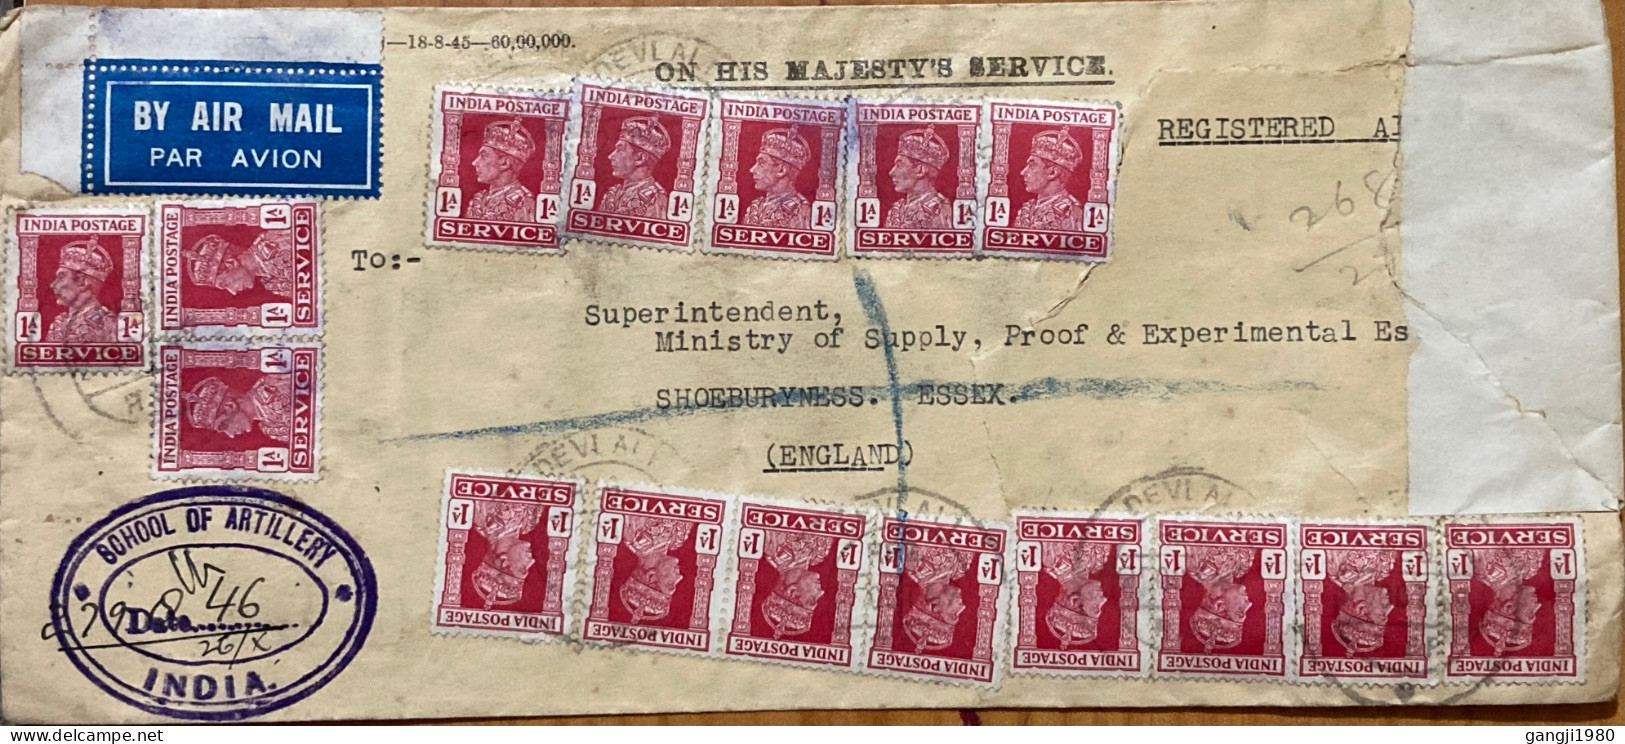 INDIA 1940, REGISTER COVER, USED TO ENGLAND, MILITARY ARMY, SCHOOL OF ARTILLERY, DEVLALI CITY CANCEL, MULTI 16 KING STAM - 1936-47 Roi Georges VI